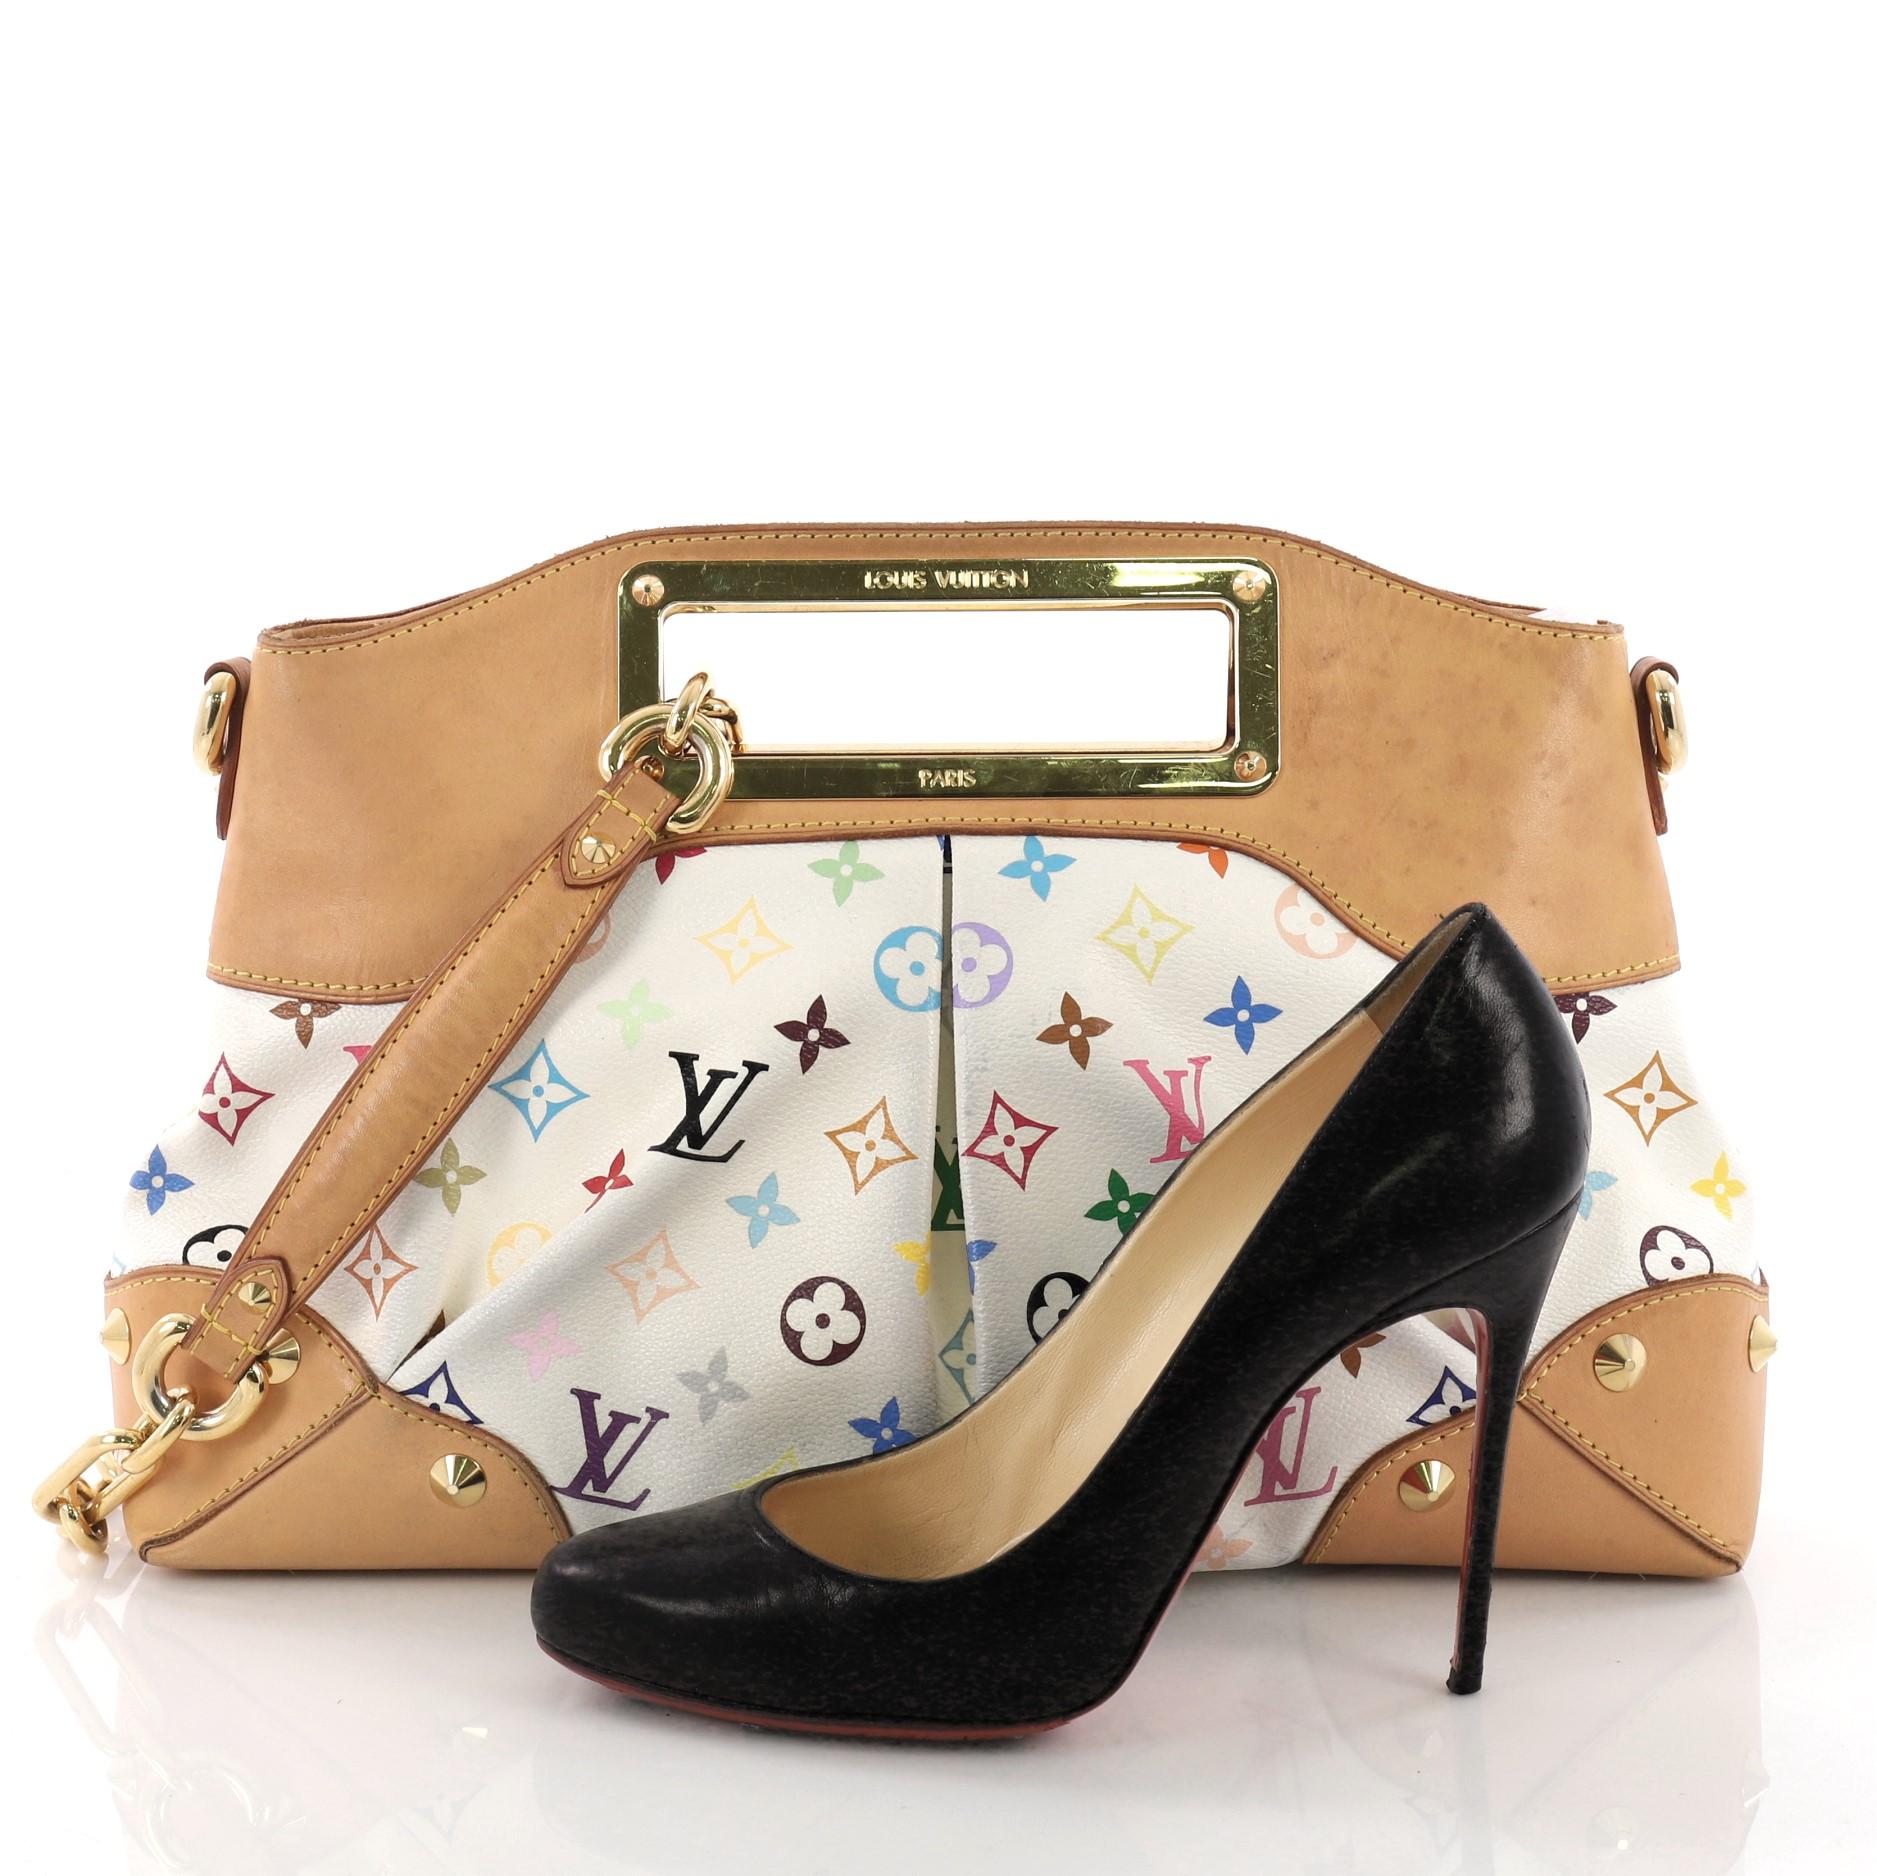 This Louis Vuitton Judy Handbag Monogram Multicolor MM, crafted from white monogram multicolor coated canvas, features a logo engraved cut-out handle, multiple gold studs, and gold-tone hardware. Its magnetic snap closure opens to a red microfiber